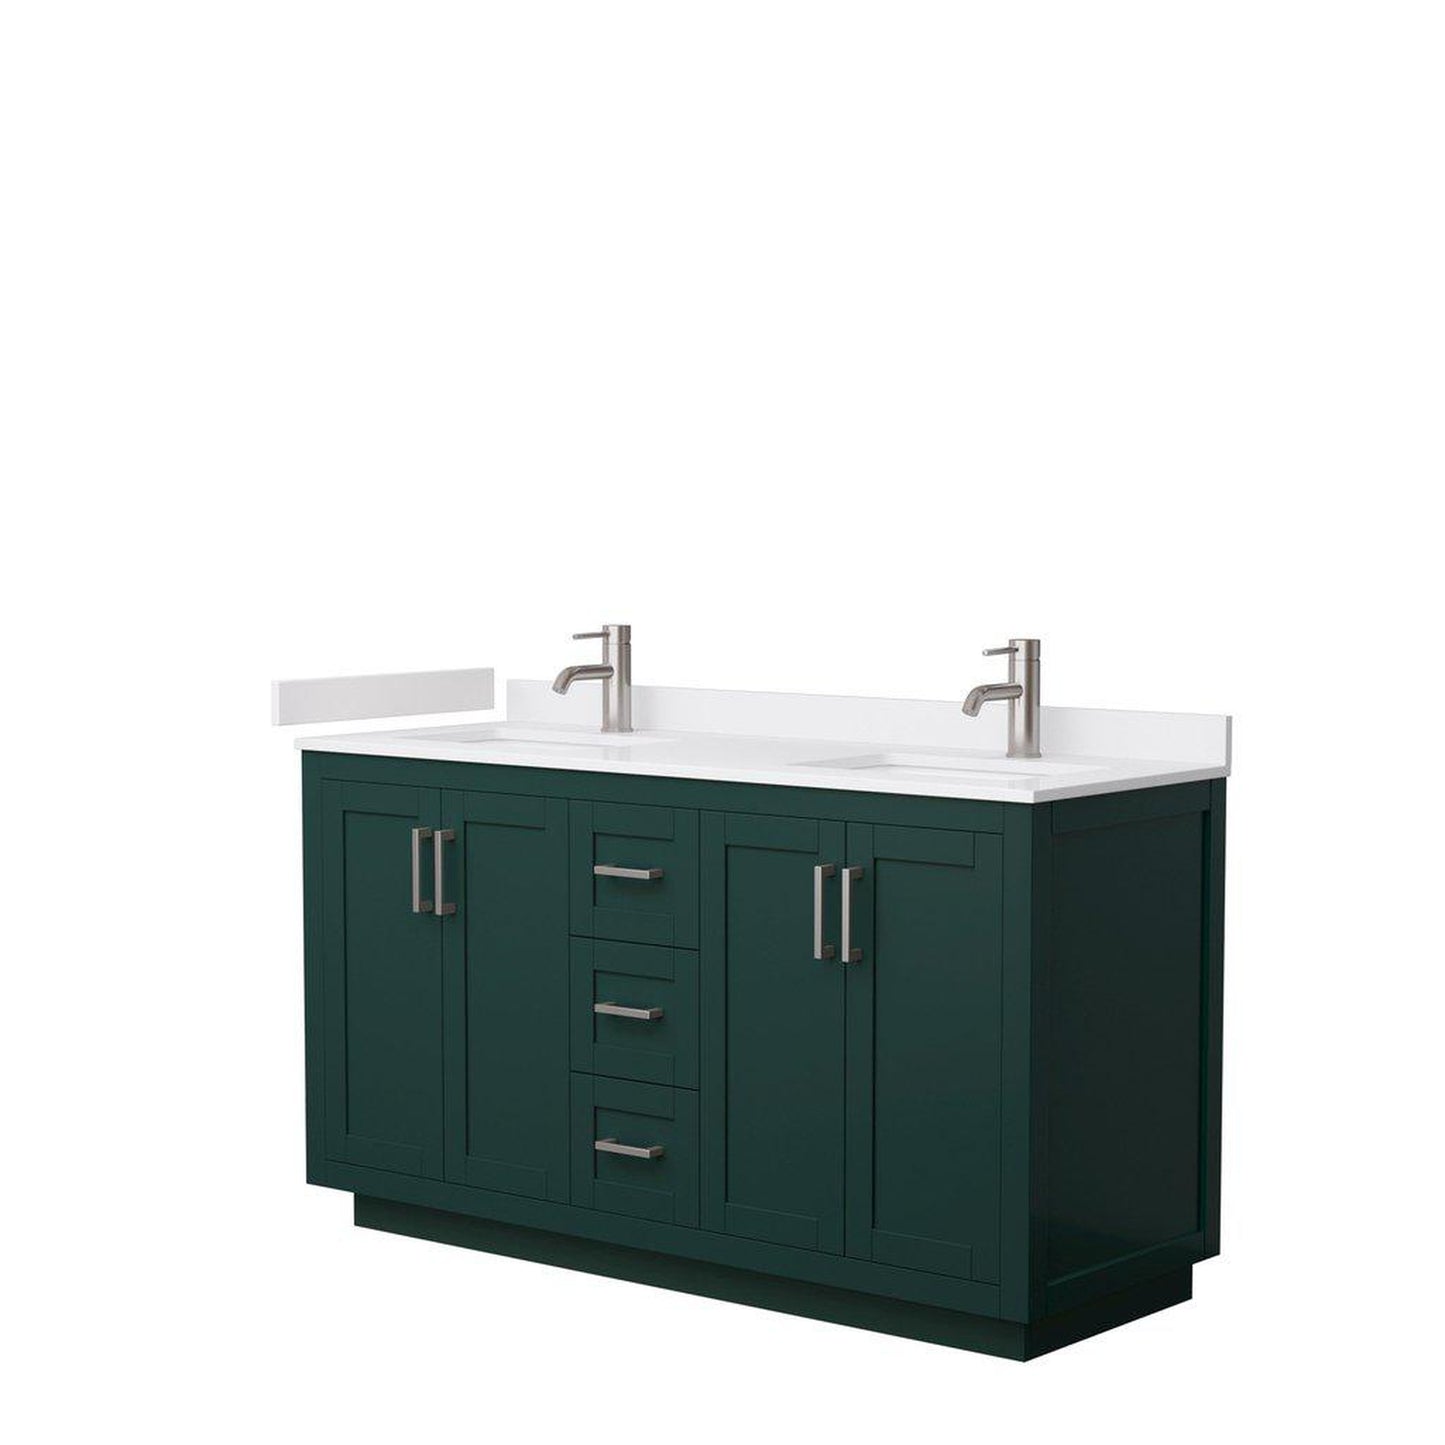 Wyndham Collection Miranda 60" Double Bathroom Green Vanity Set With White Cultured Marble Countertop, Undermount Square Sink, And Brushed Nickel Trim